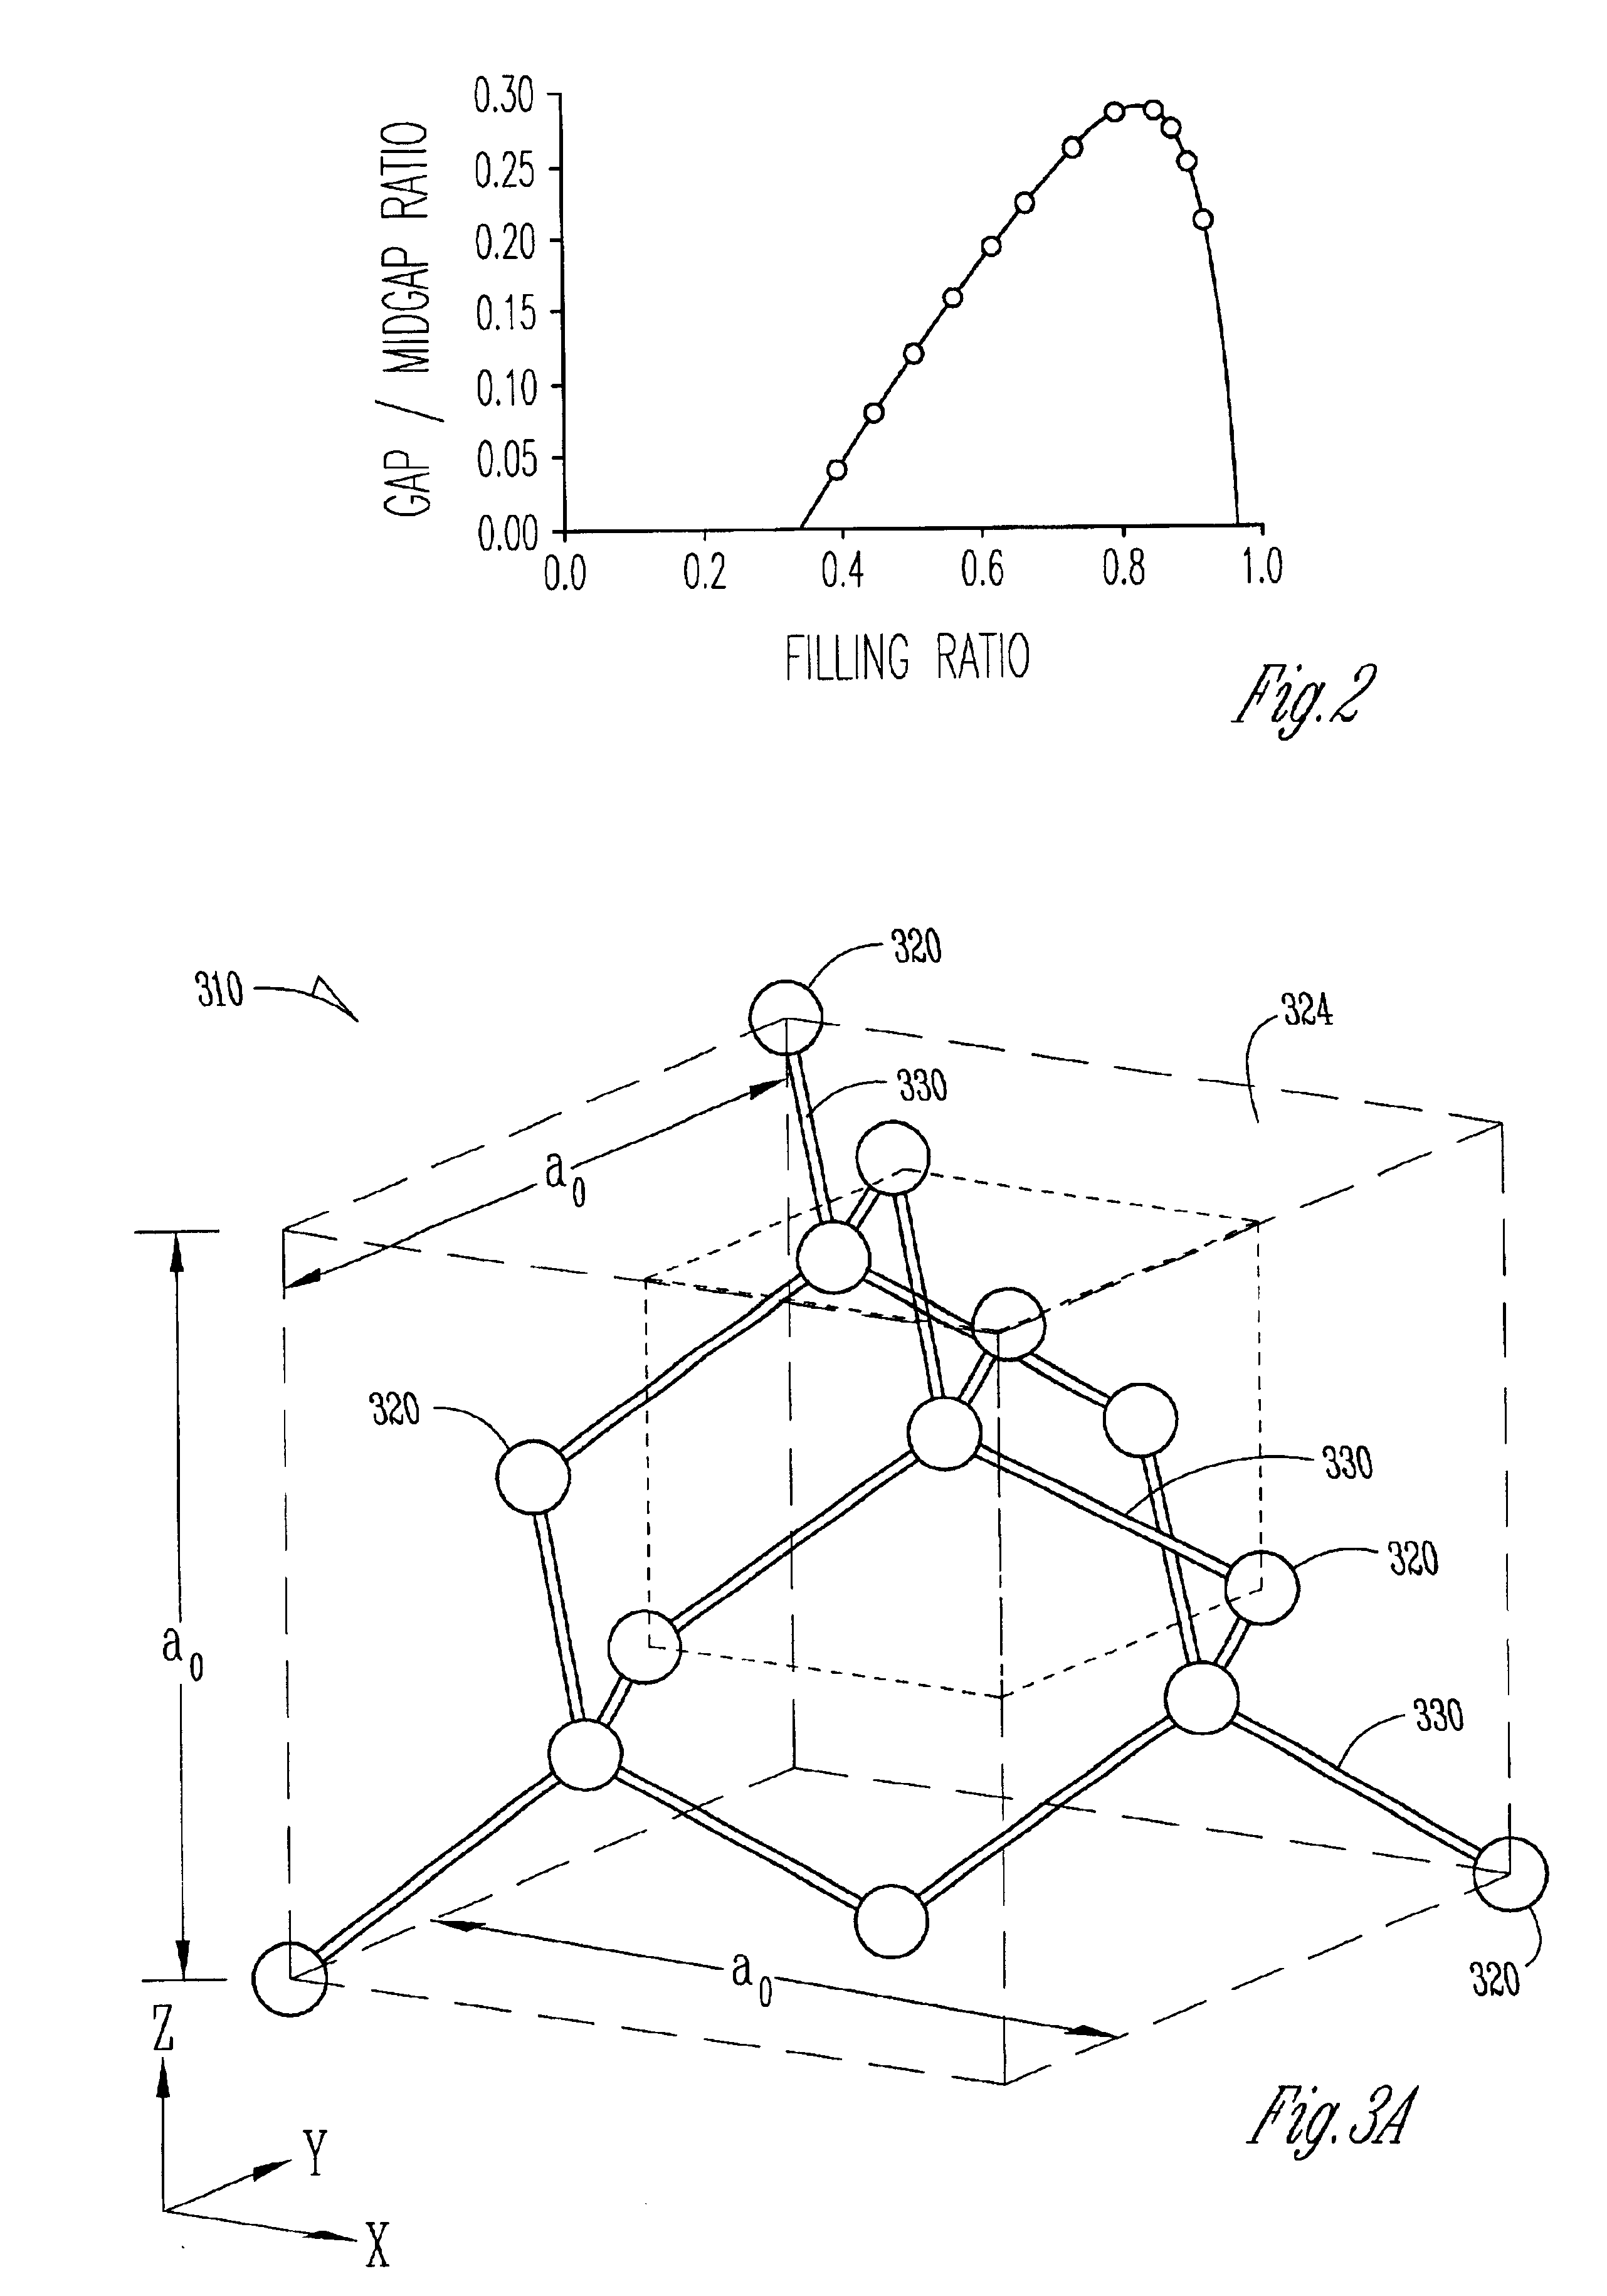 Three-dimensional photonic crystal waveguide structure and method